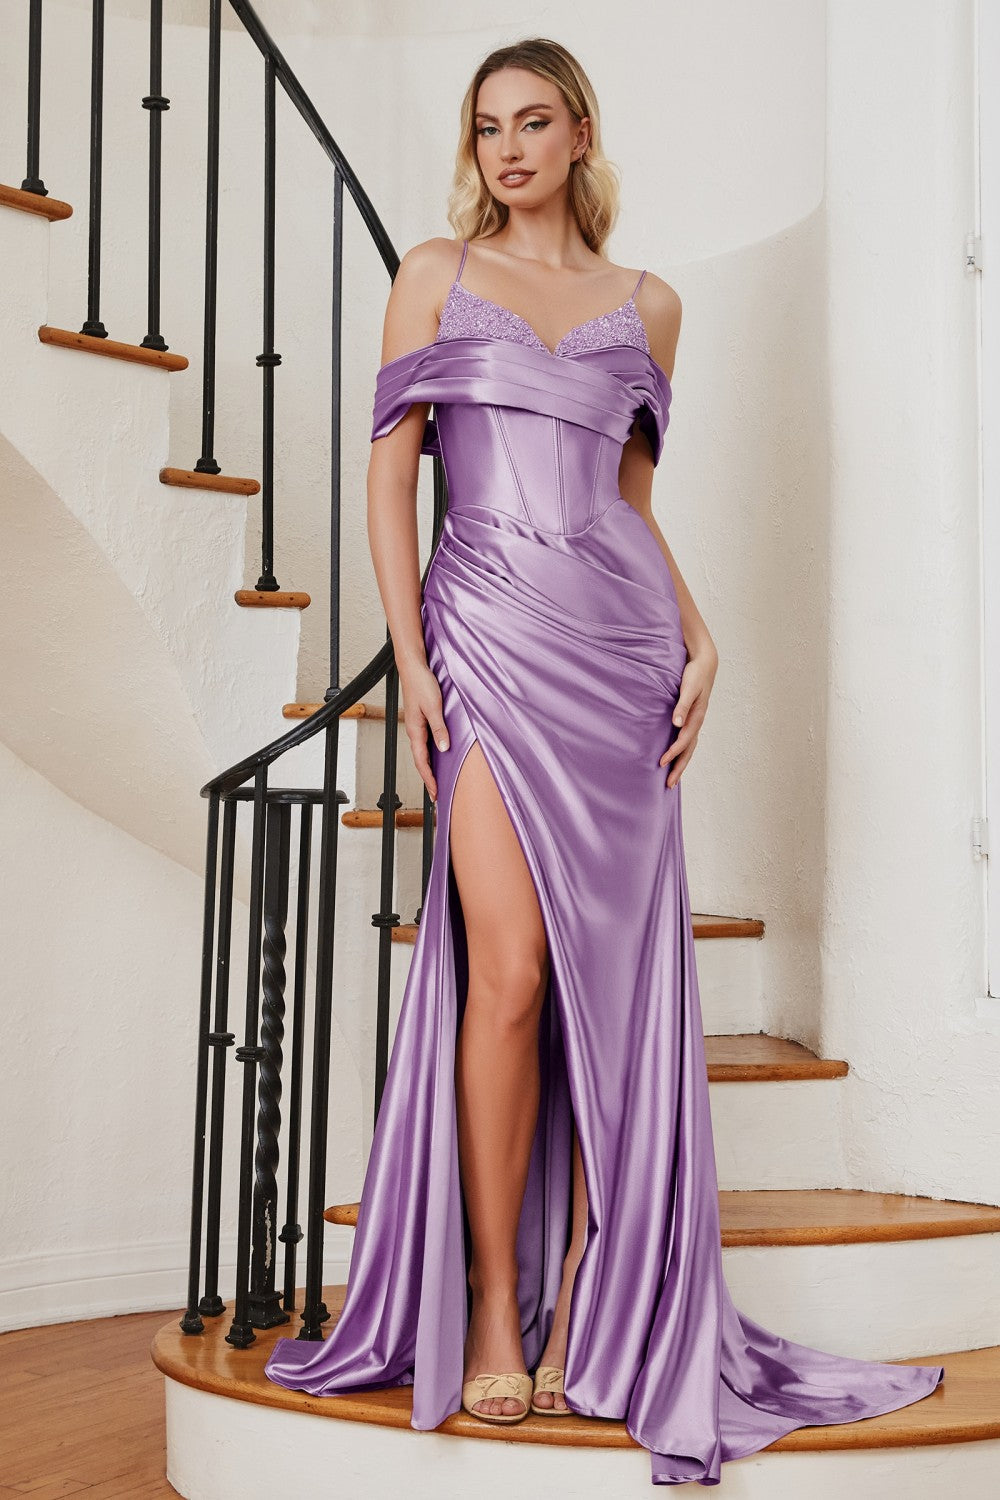 Fitted Soft Satin Gala Luxury Cocktail & Formal Night Dress Sequin bustier Strap Off Shoulder Bodice Prom Bridesmaid gown CDCC2197 Sale Elsy Style Evening Dress